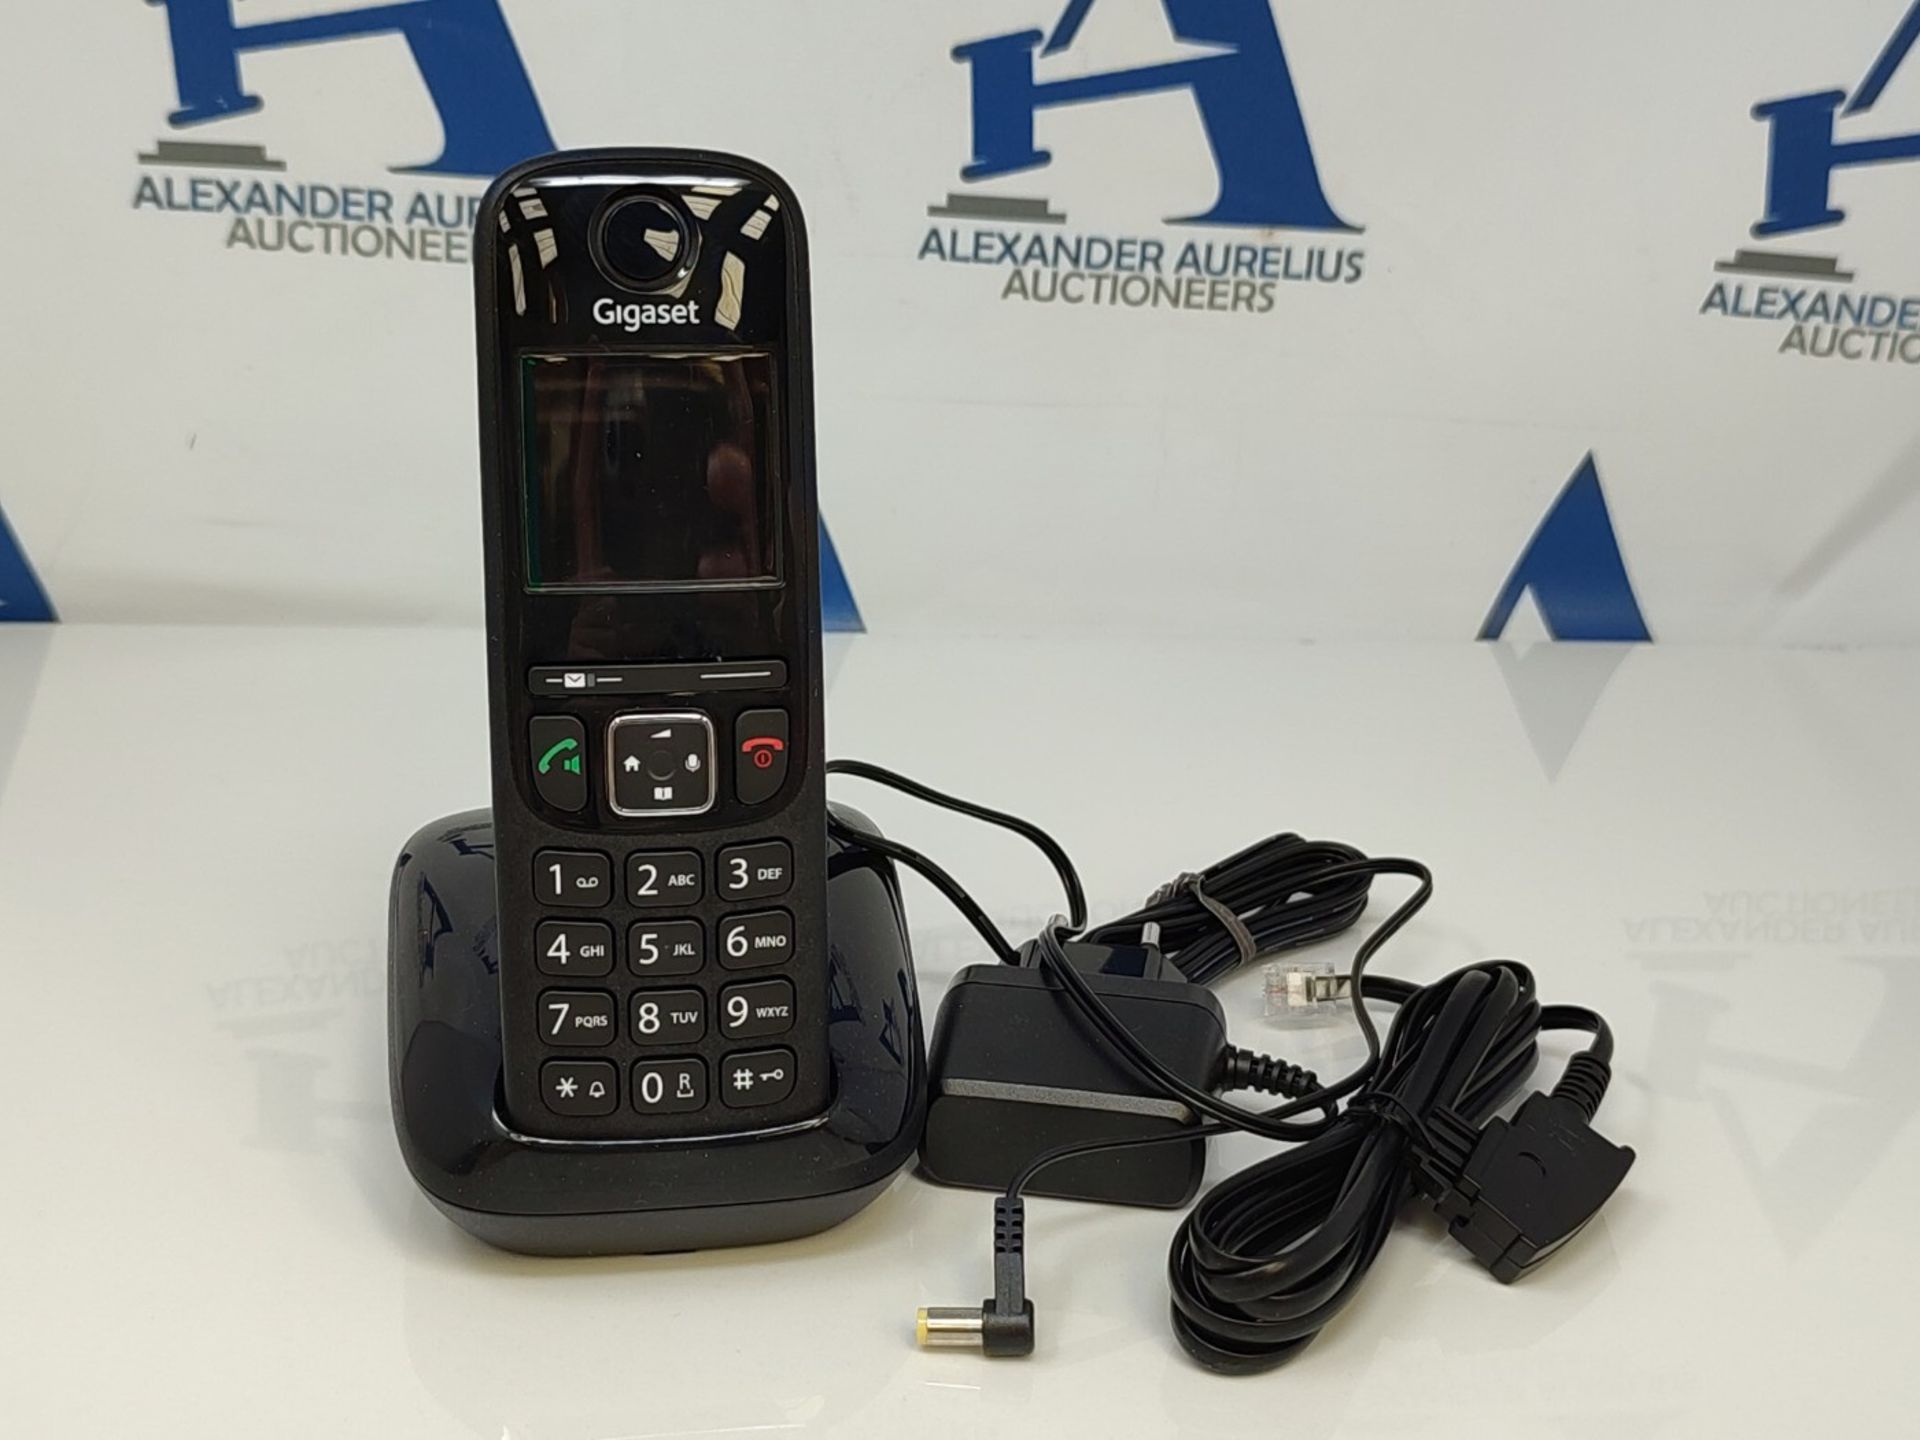 Gigaset AS690 - Cordless DECT Telephone - large, high-contrast display - brilliant aud - Image 3 of 3